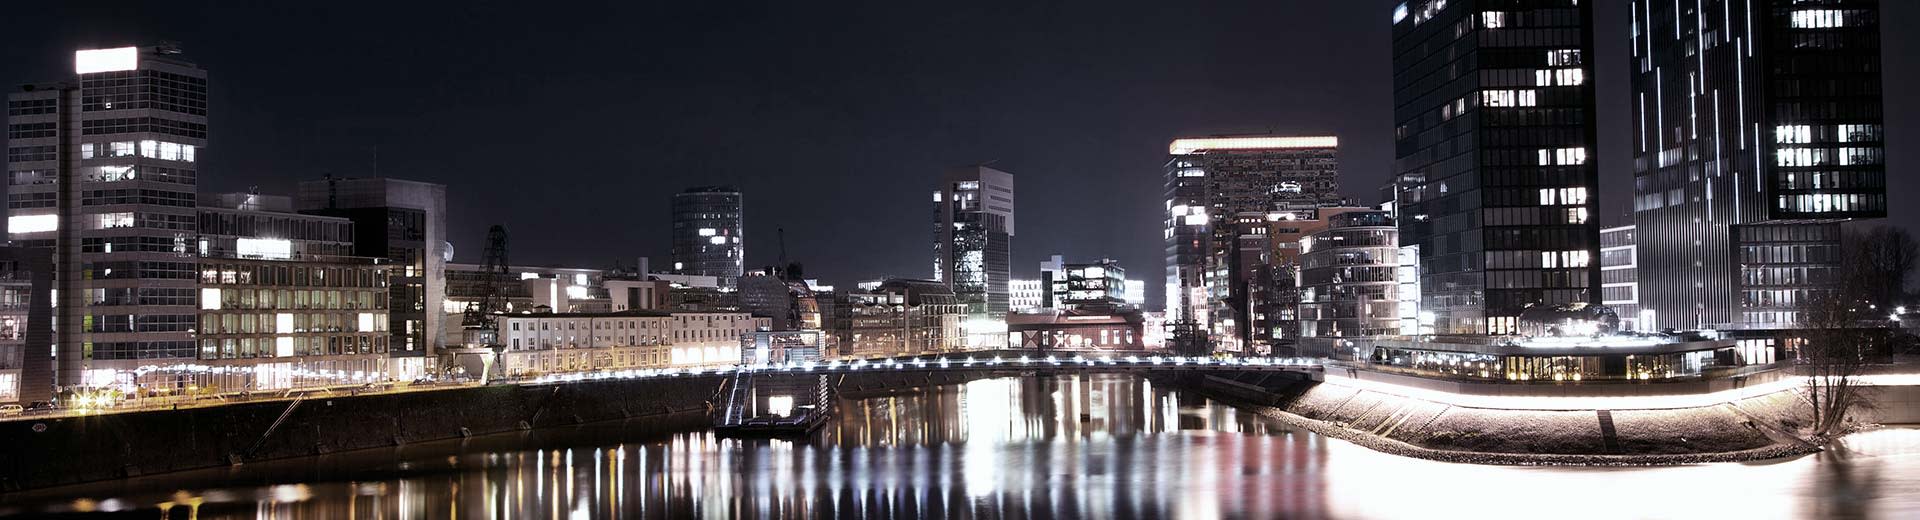 A bridge over a body of water in Neuss at night, with tall buildings lighting up the immediate area.